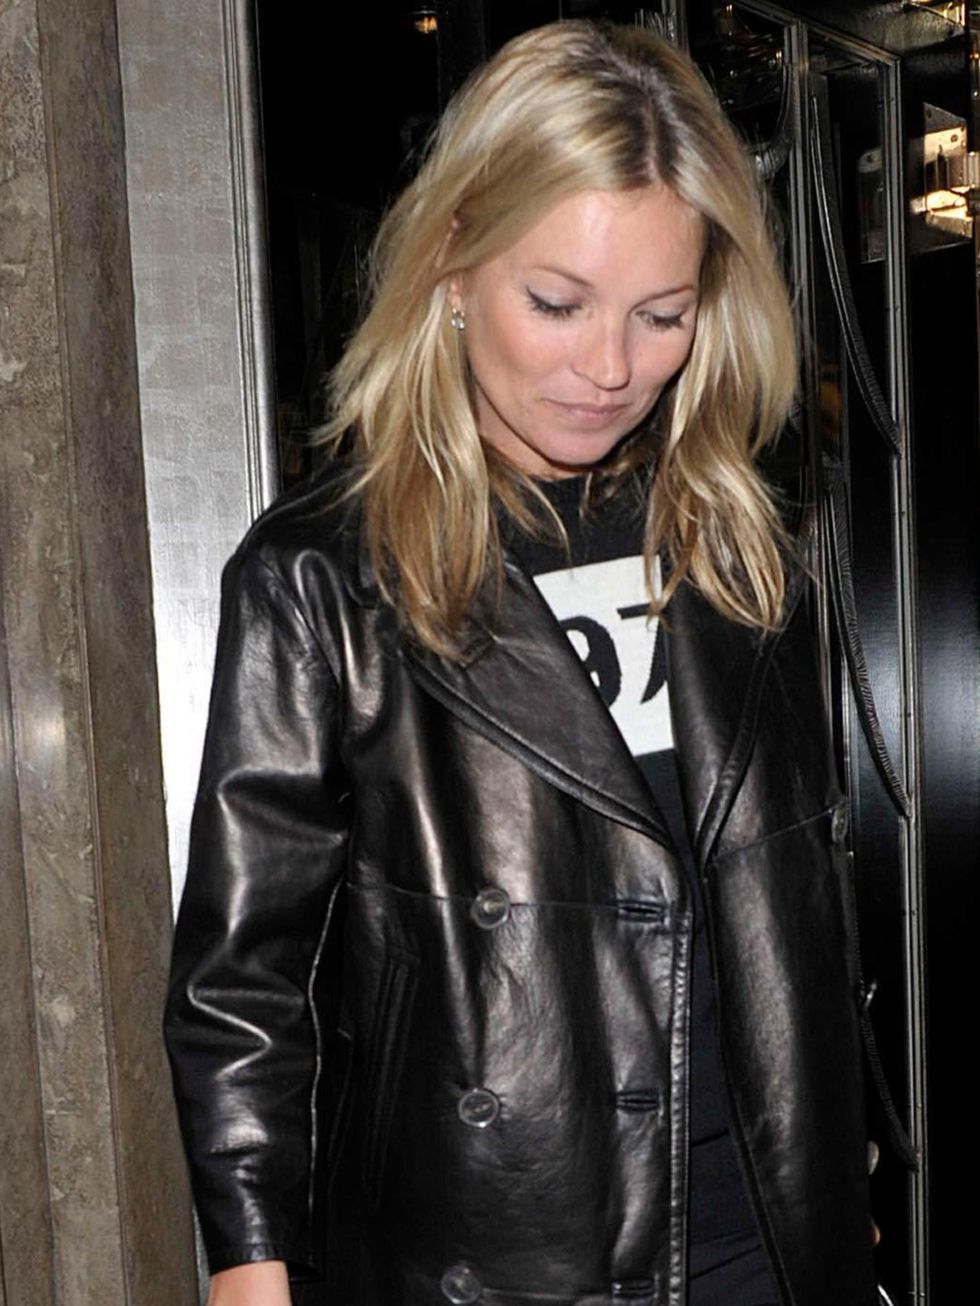 <p><a href="http://www.elleuk.com/star-style/celebrity-style-files/kate-moss">Kate Moss</a> wearing a <a href="http://www.elleuk.com/fashion/news/bella-freud-s-sweater-girls">Bella Freud</a> sweater during <a href="http://www.elleuk.com/style/street-style